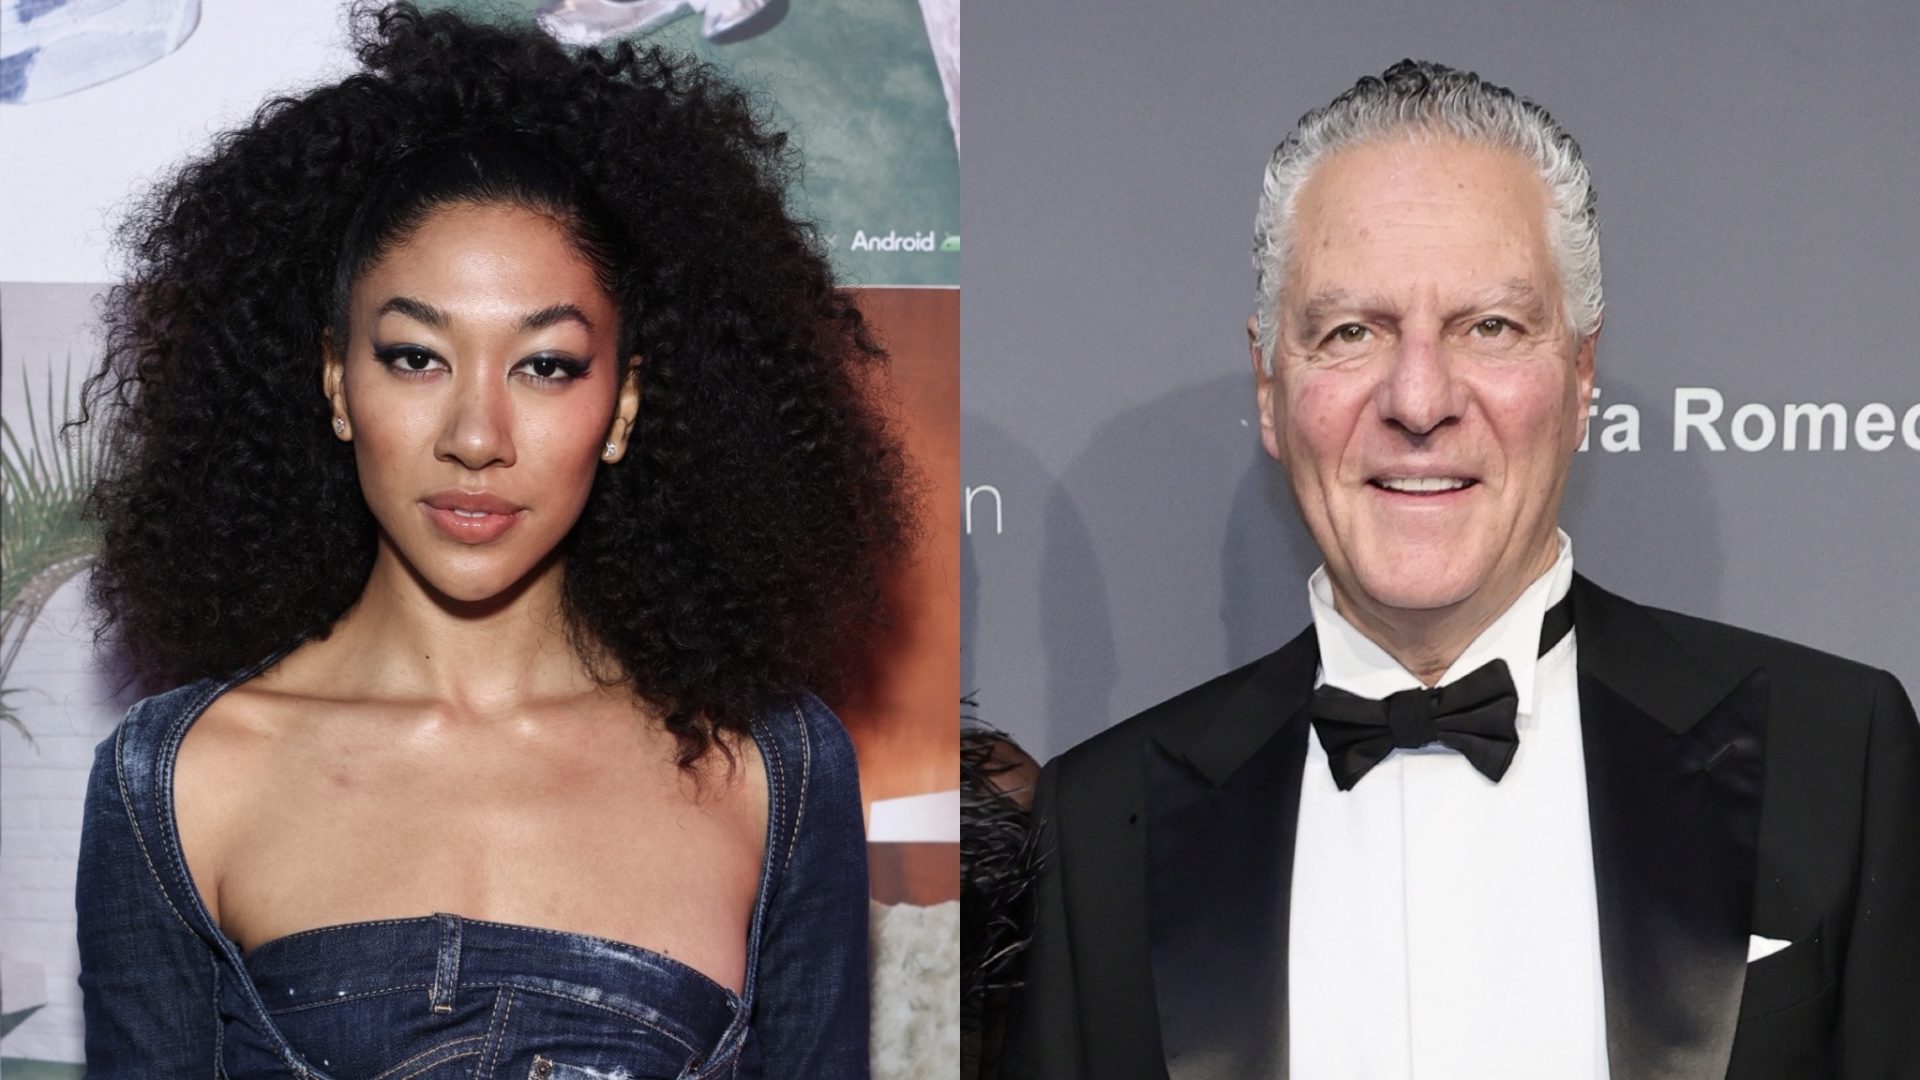 Issa Bae Watch?! Aoki Lee Simmons Seemingly Reacts After She’s Spotted Kissing 65-Year-Old Businessman Vittorio Assaf